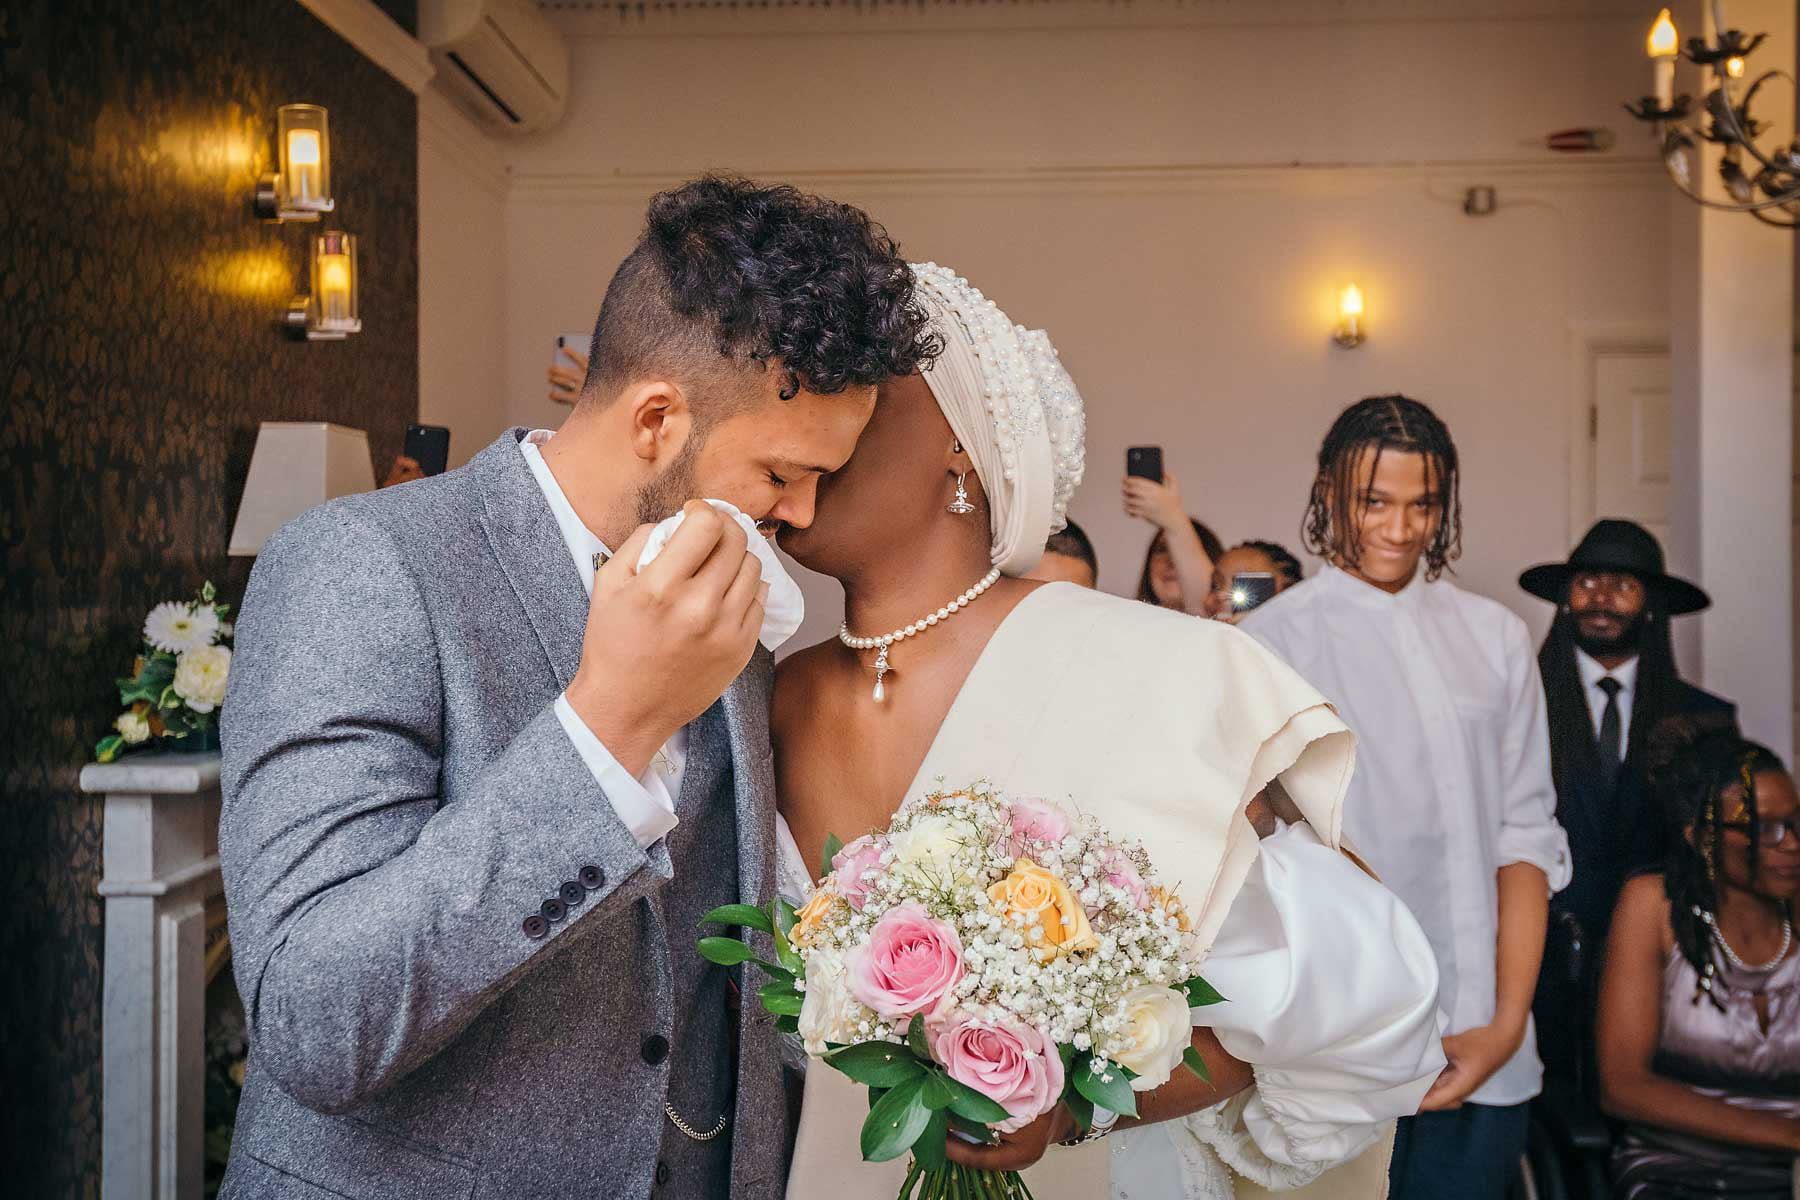 The bride kisses her groom as her wipes away a tear at a London wedding